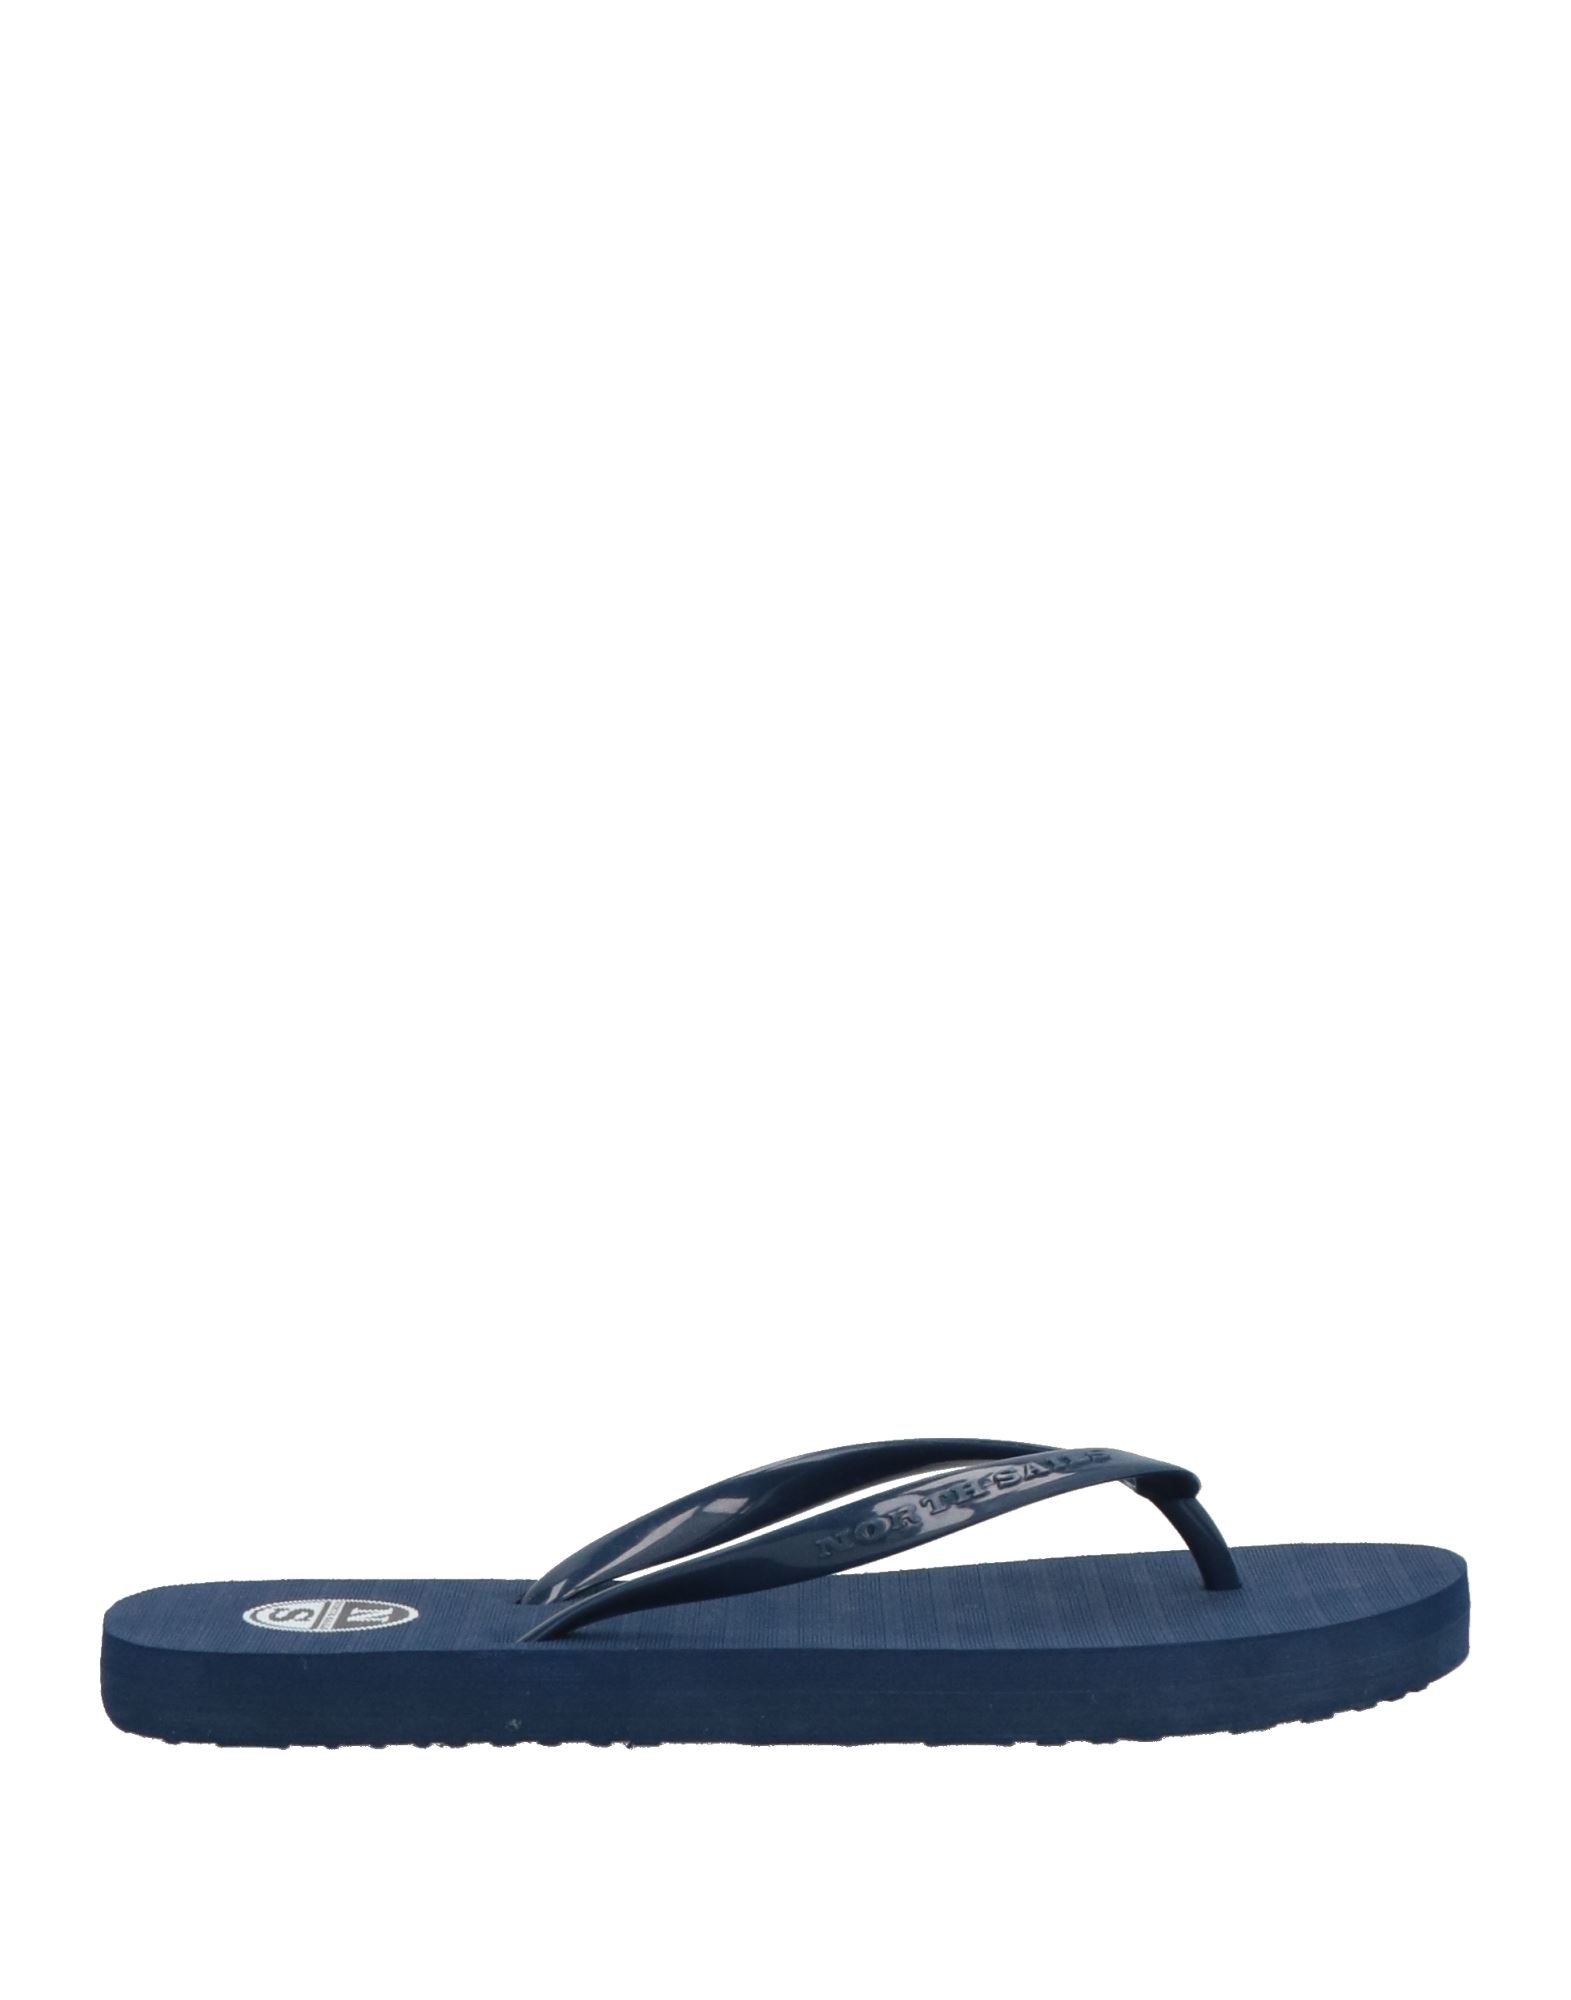 North Sails Toe Strap Sandals In Navy Blue